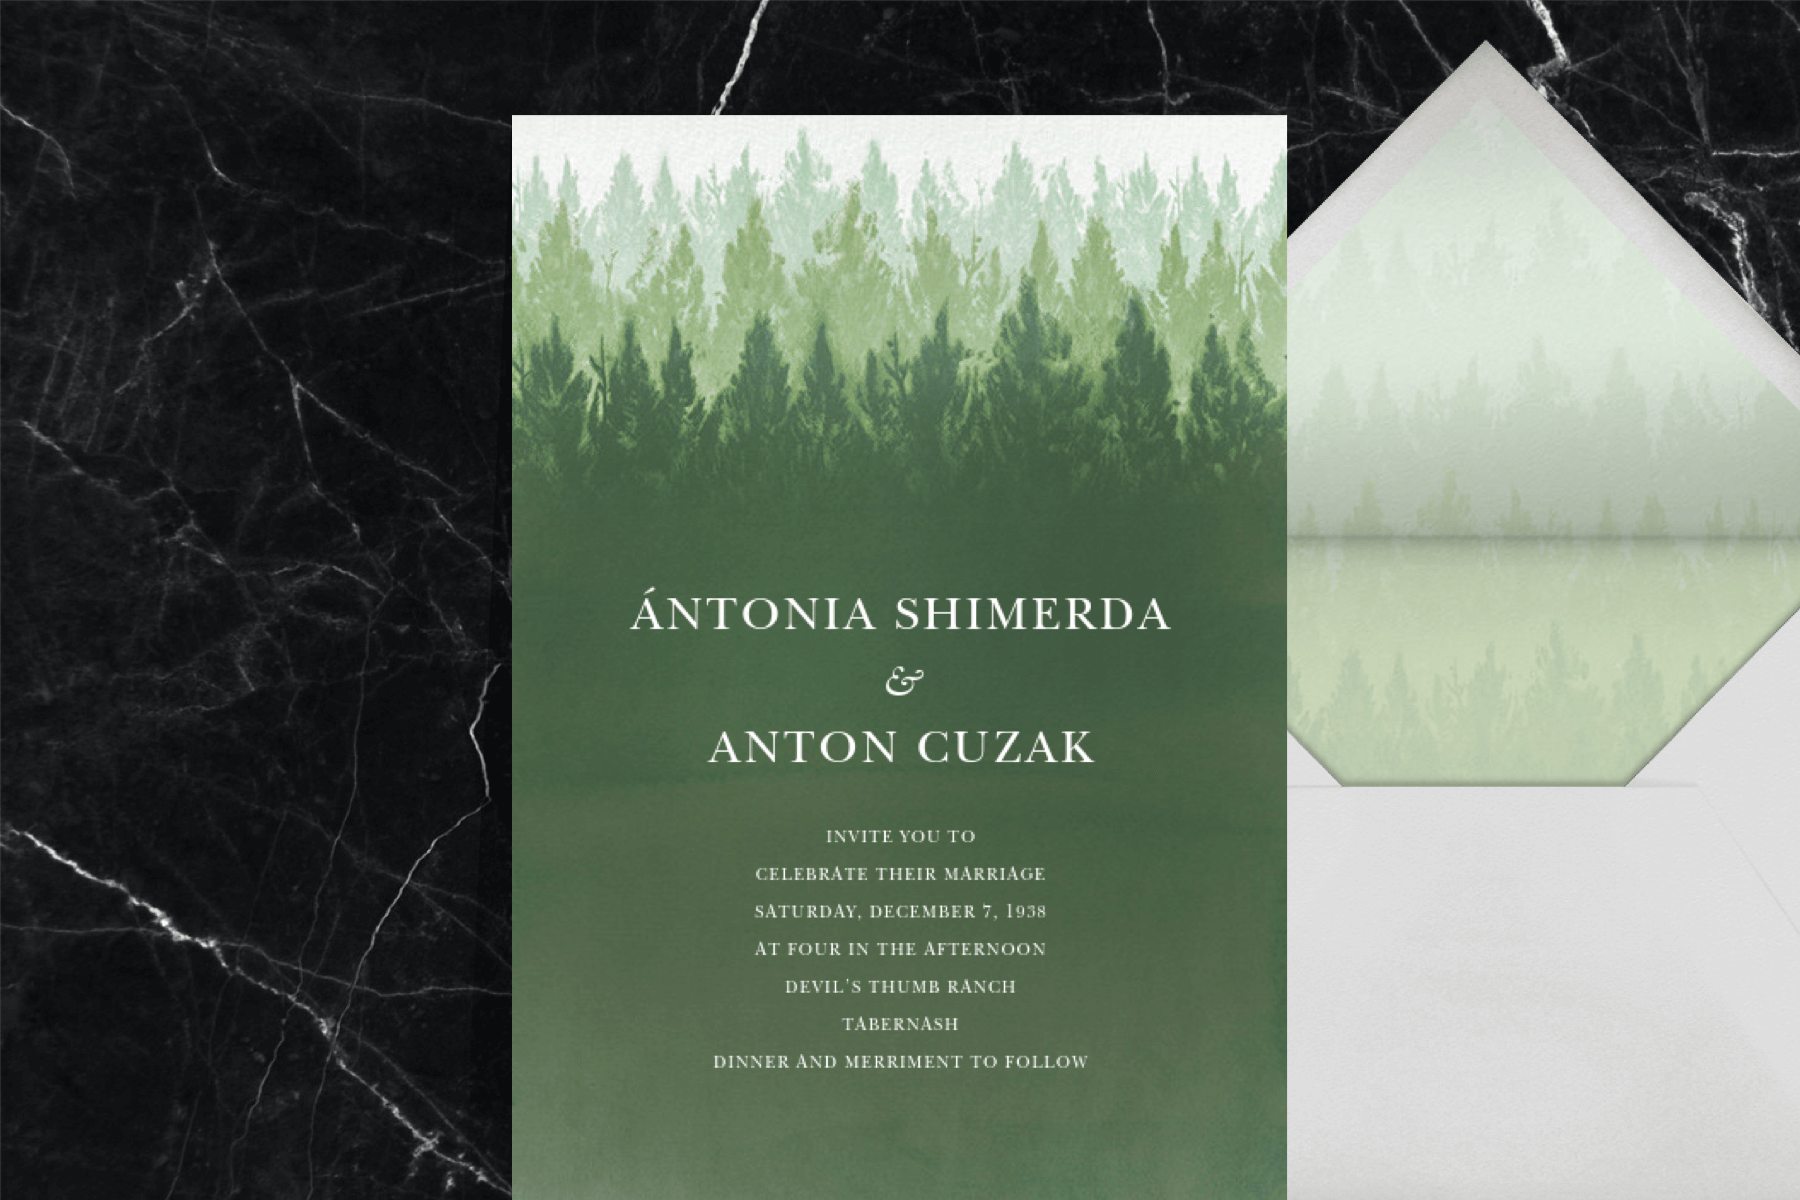 A green wedding invitation with an evergreen forest motif.